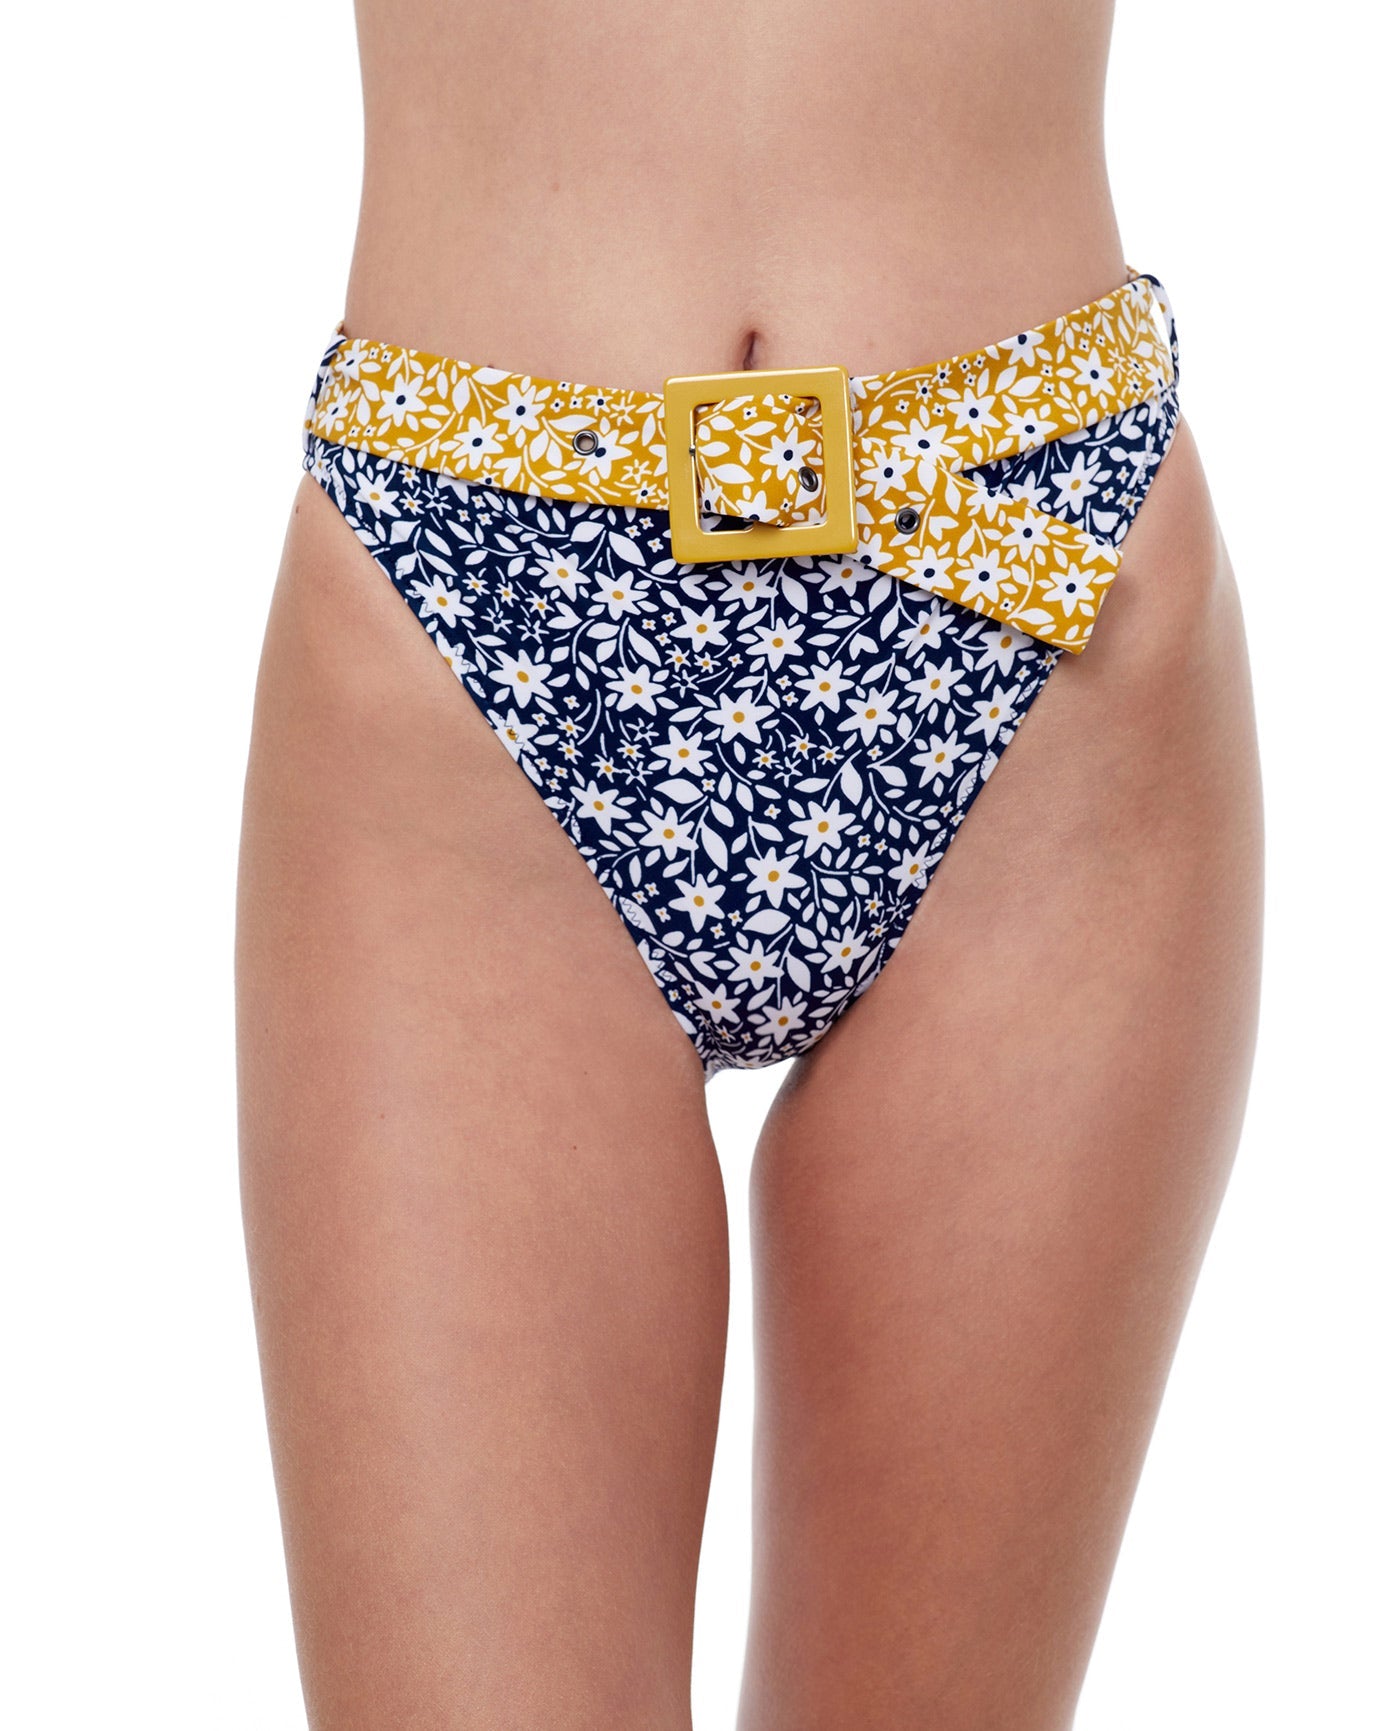 Front View Of Luma Shimmering Daisies High Leg Sexy Bikini Bottom | LUMA SHIMMERING DAISIES NAVY AND GOLD